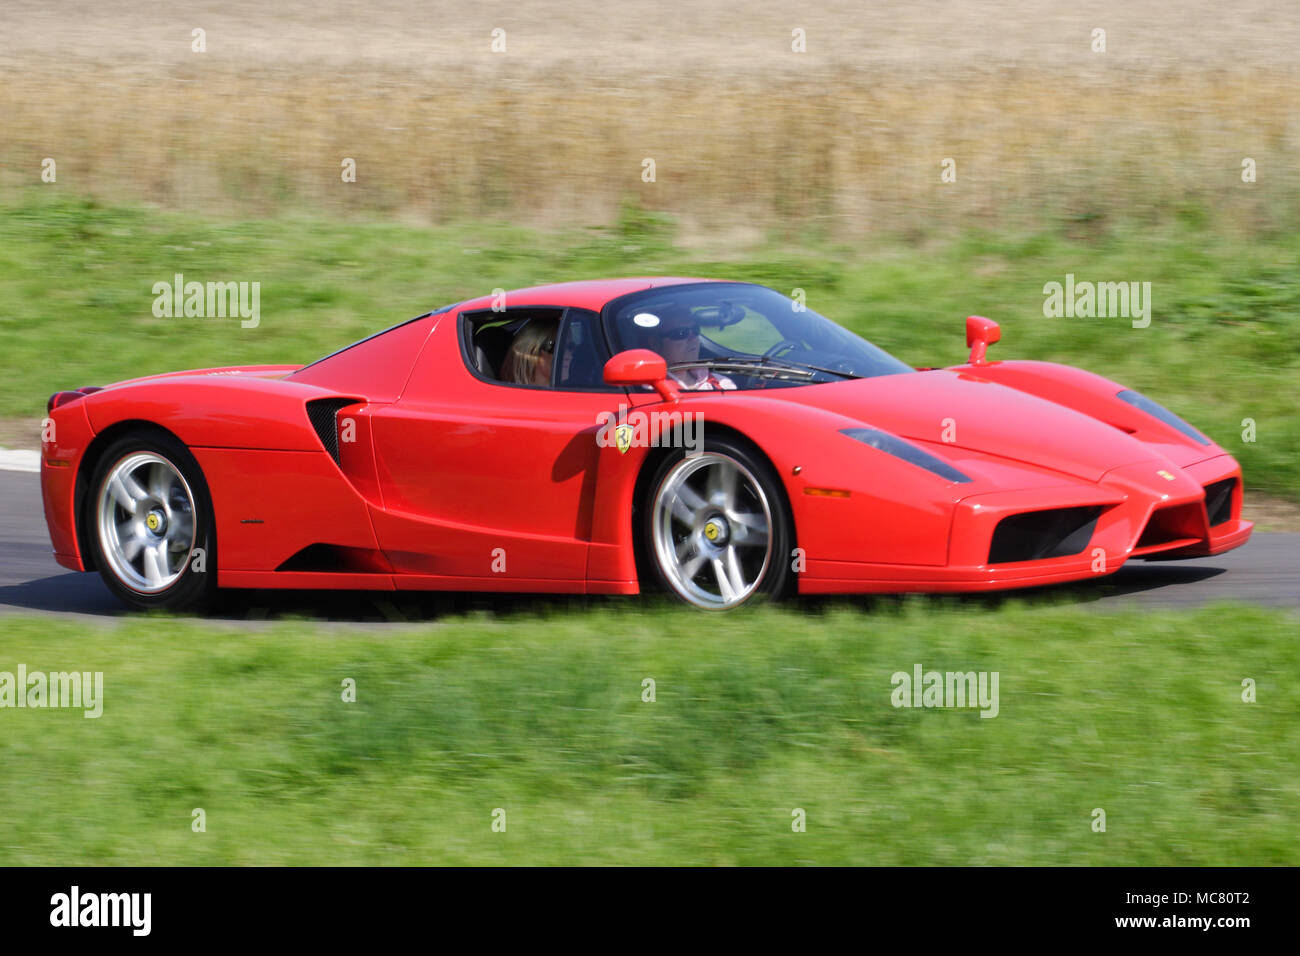 Beautiful Red Ferrari Enzo mid-engined V12 hyper car driving fast Stock Photo